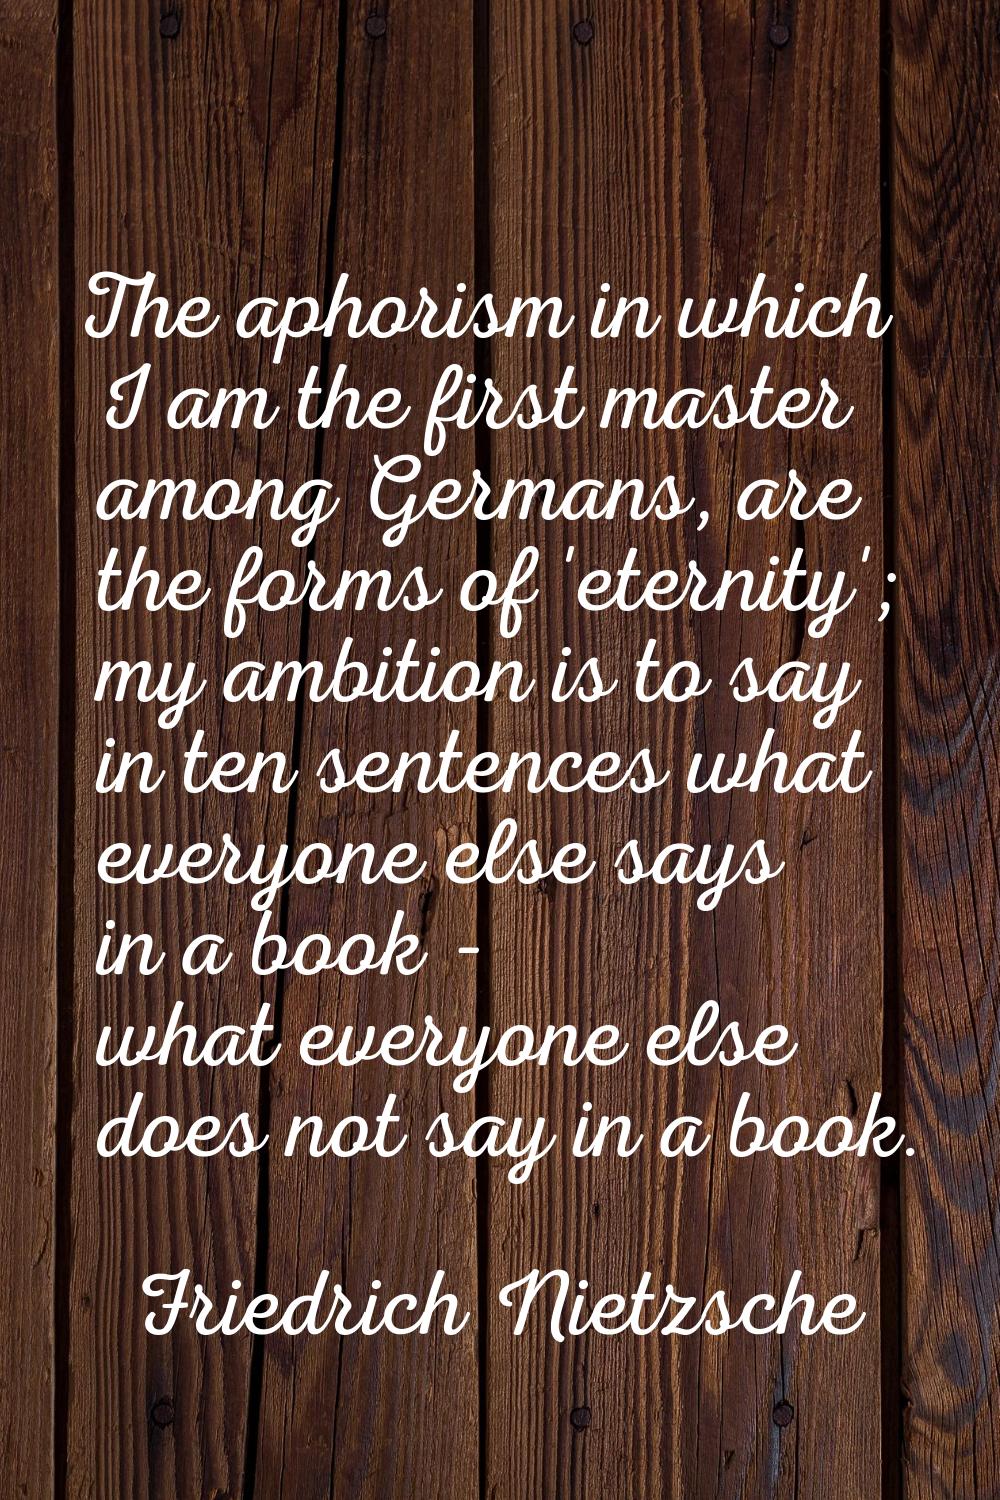 The aphorism in which I am the first master among Germans, are the forms of 'eternity'; my ambition